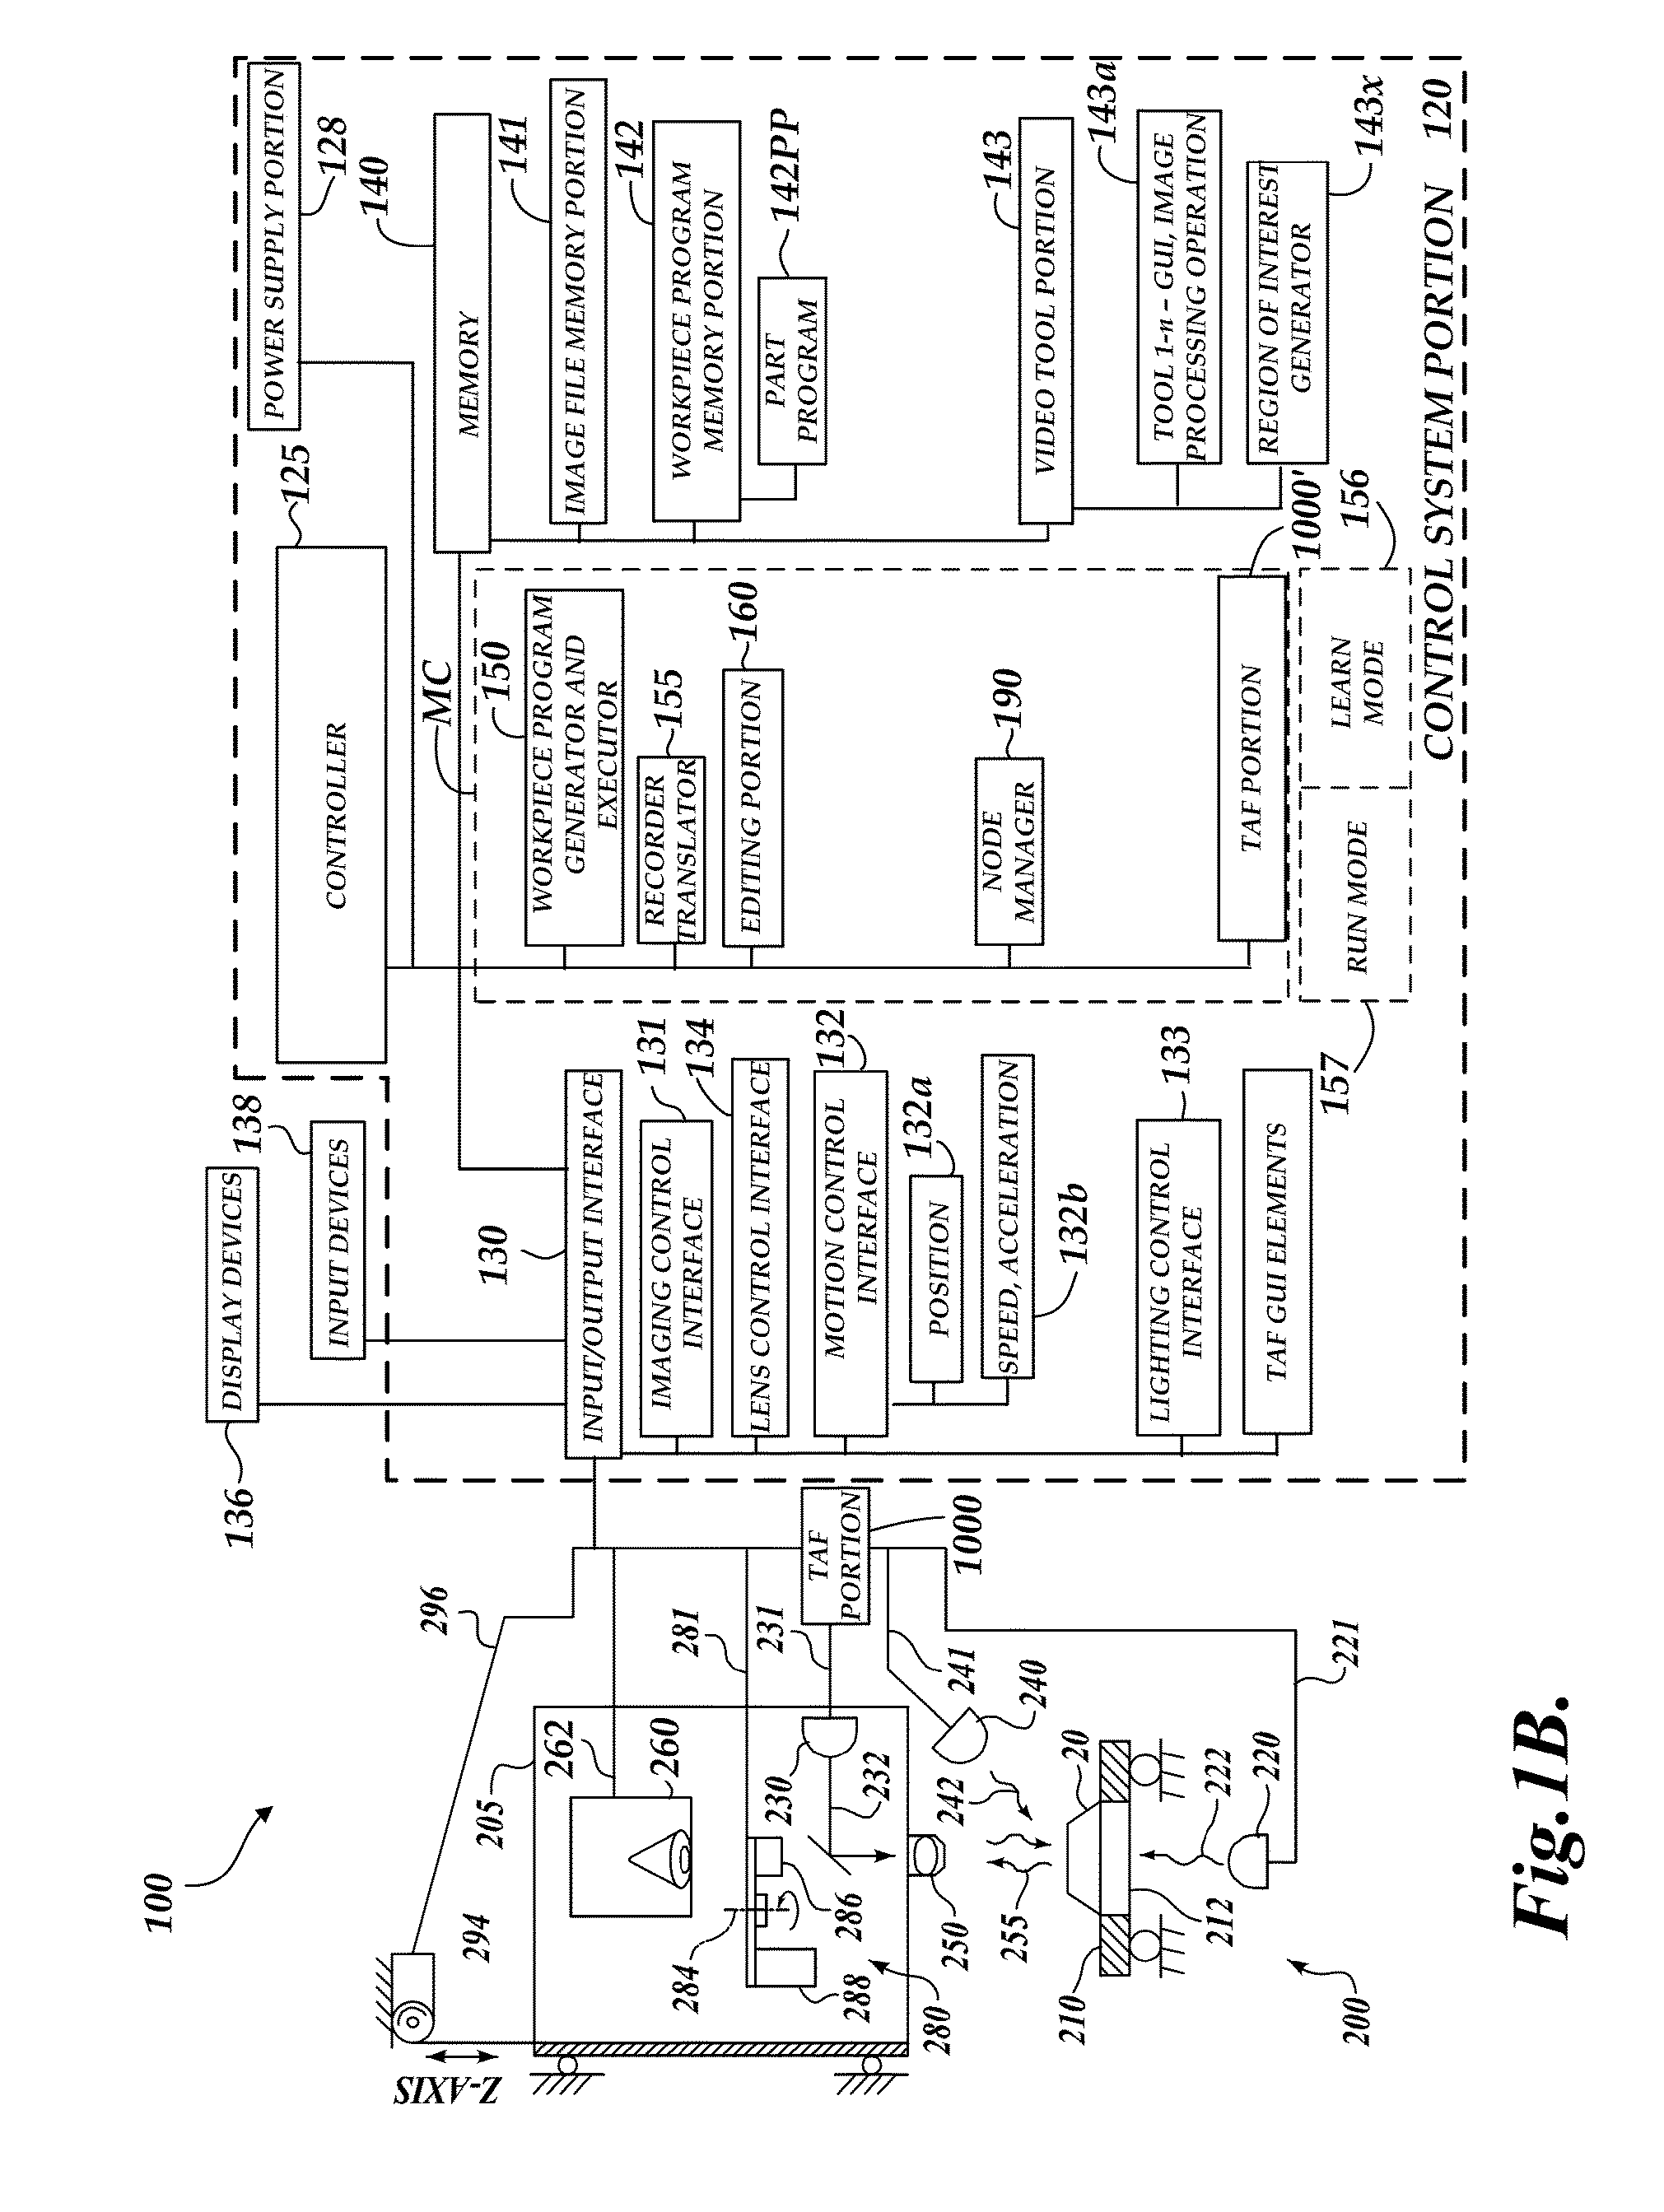 System and method for controlling a tracking autofocus (TAF) sensor in a machine vision inspection system